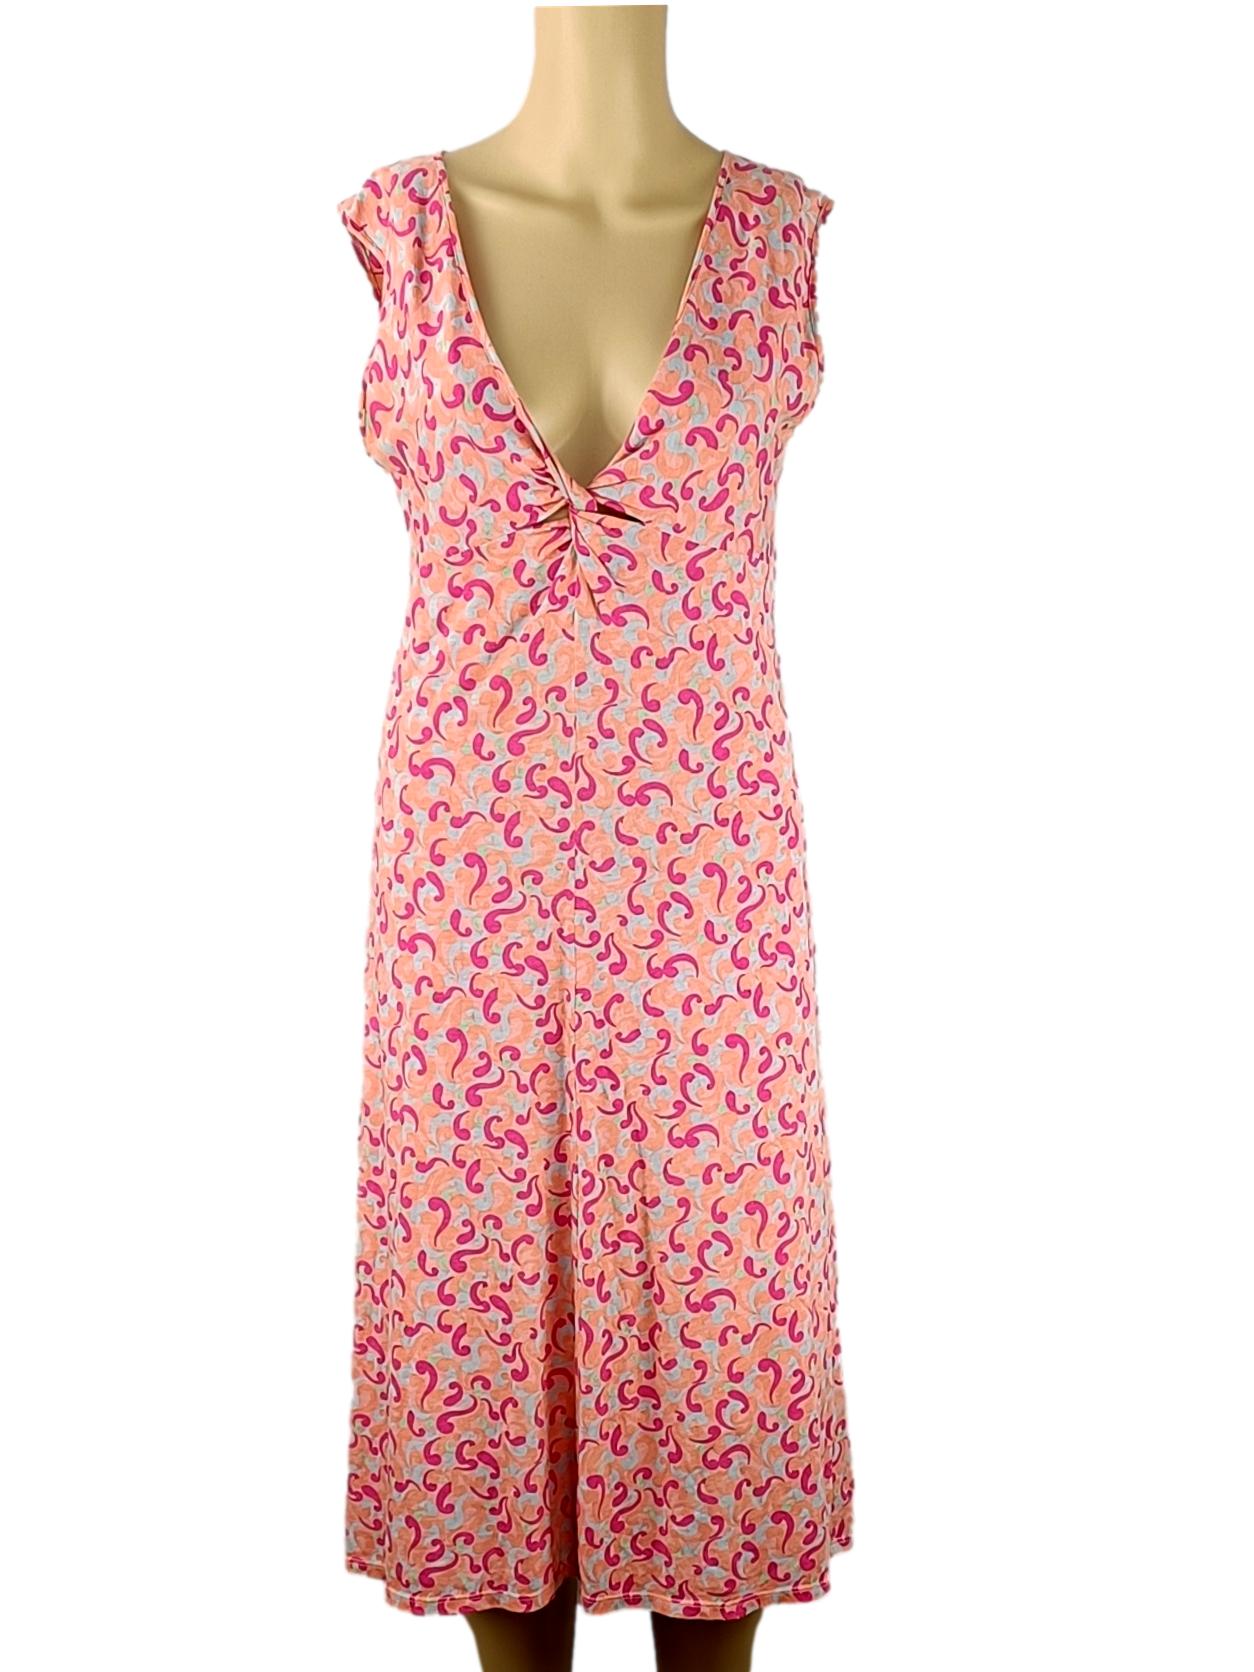 Robe Free People - Taille M